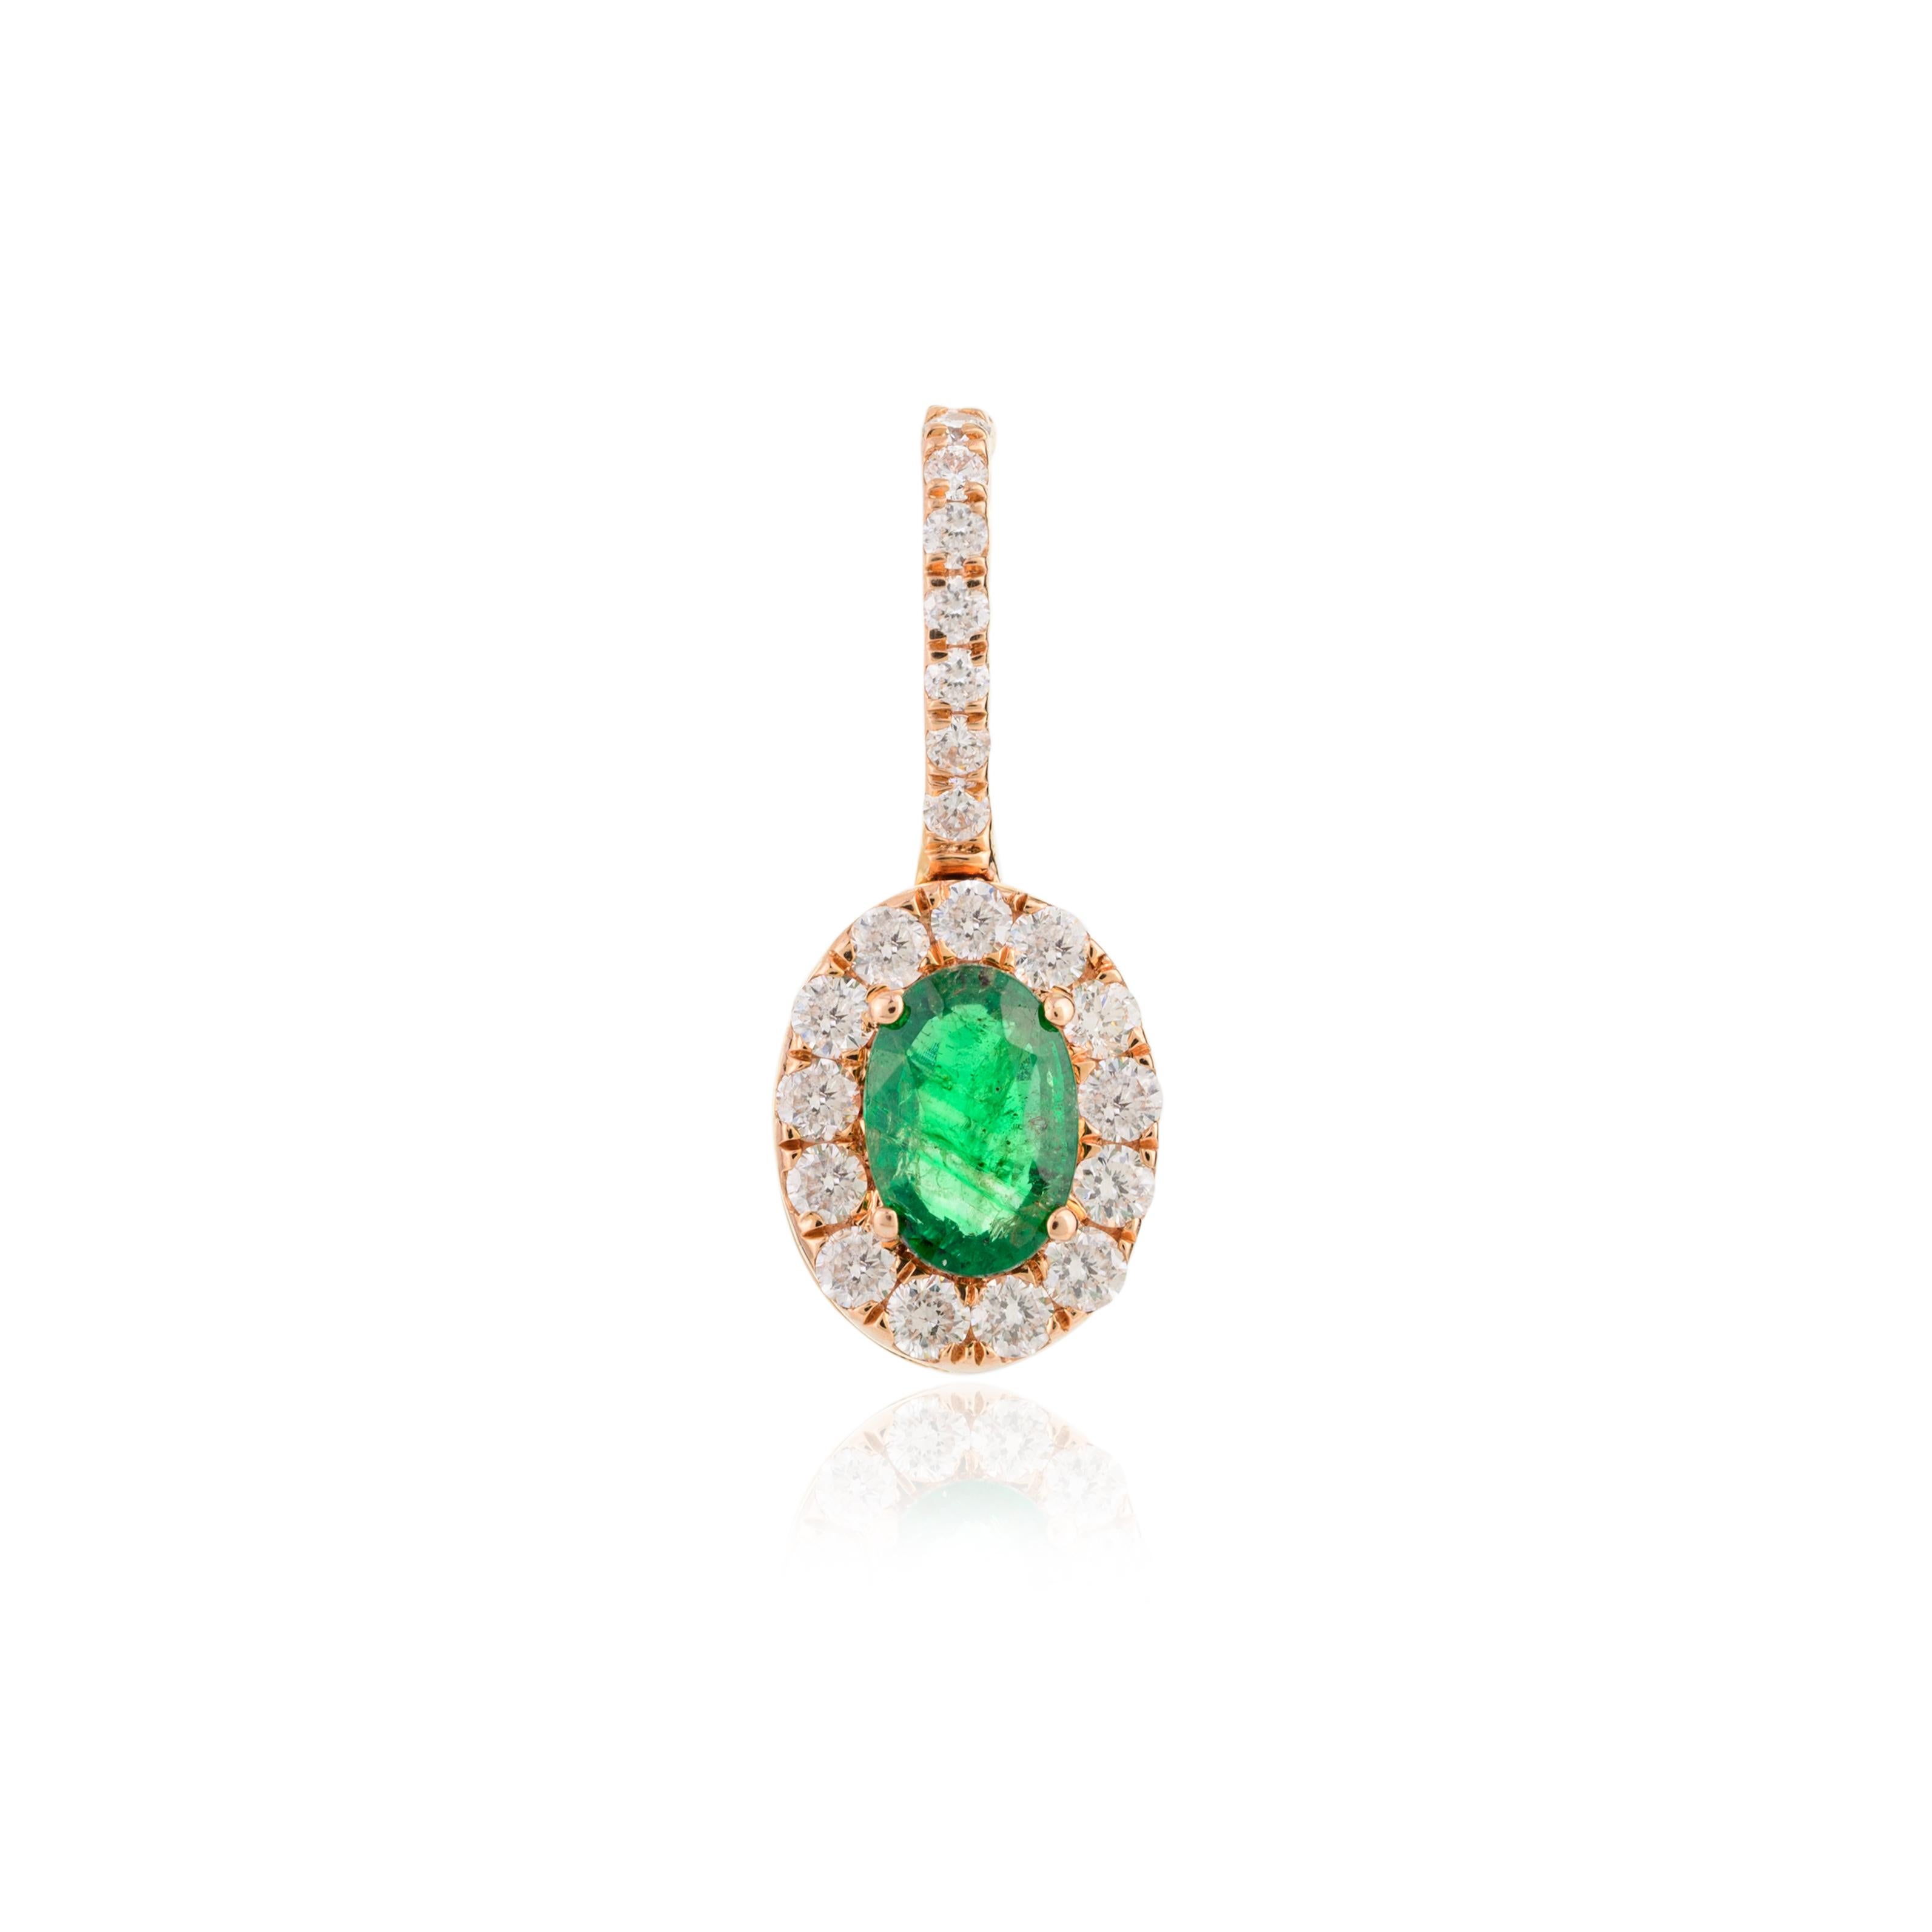 Certified Real Emerald Halo Diamond Pendant in 18K Gold studded with oval cut emerald and halo of diamonds. This stunning piece of jewelry instantly elevates a casual look or dressy outfit. 
Emerald enhances the intellectual capacity of the